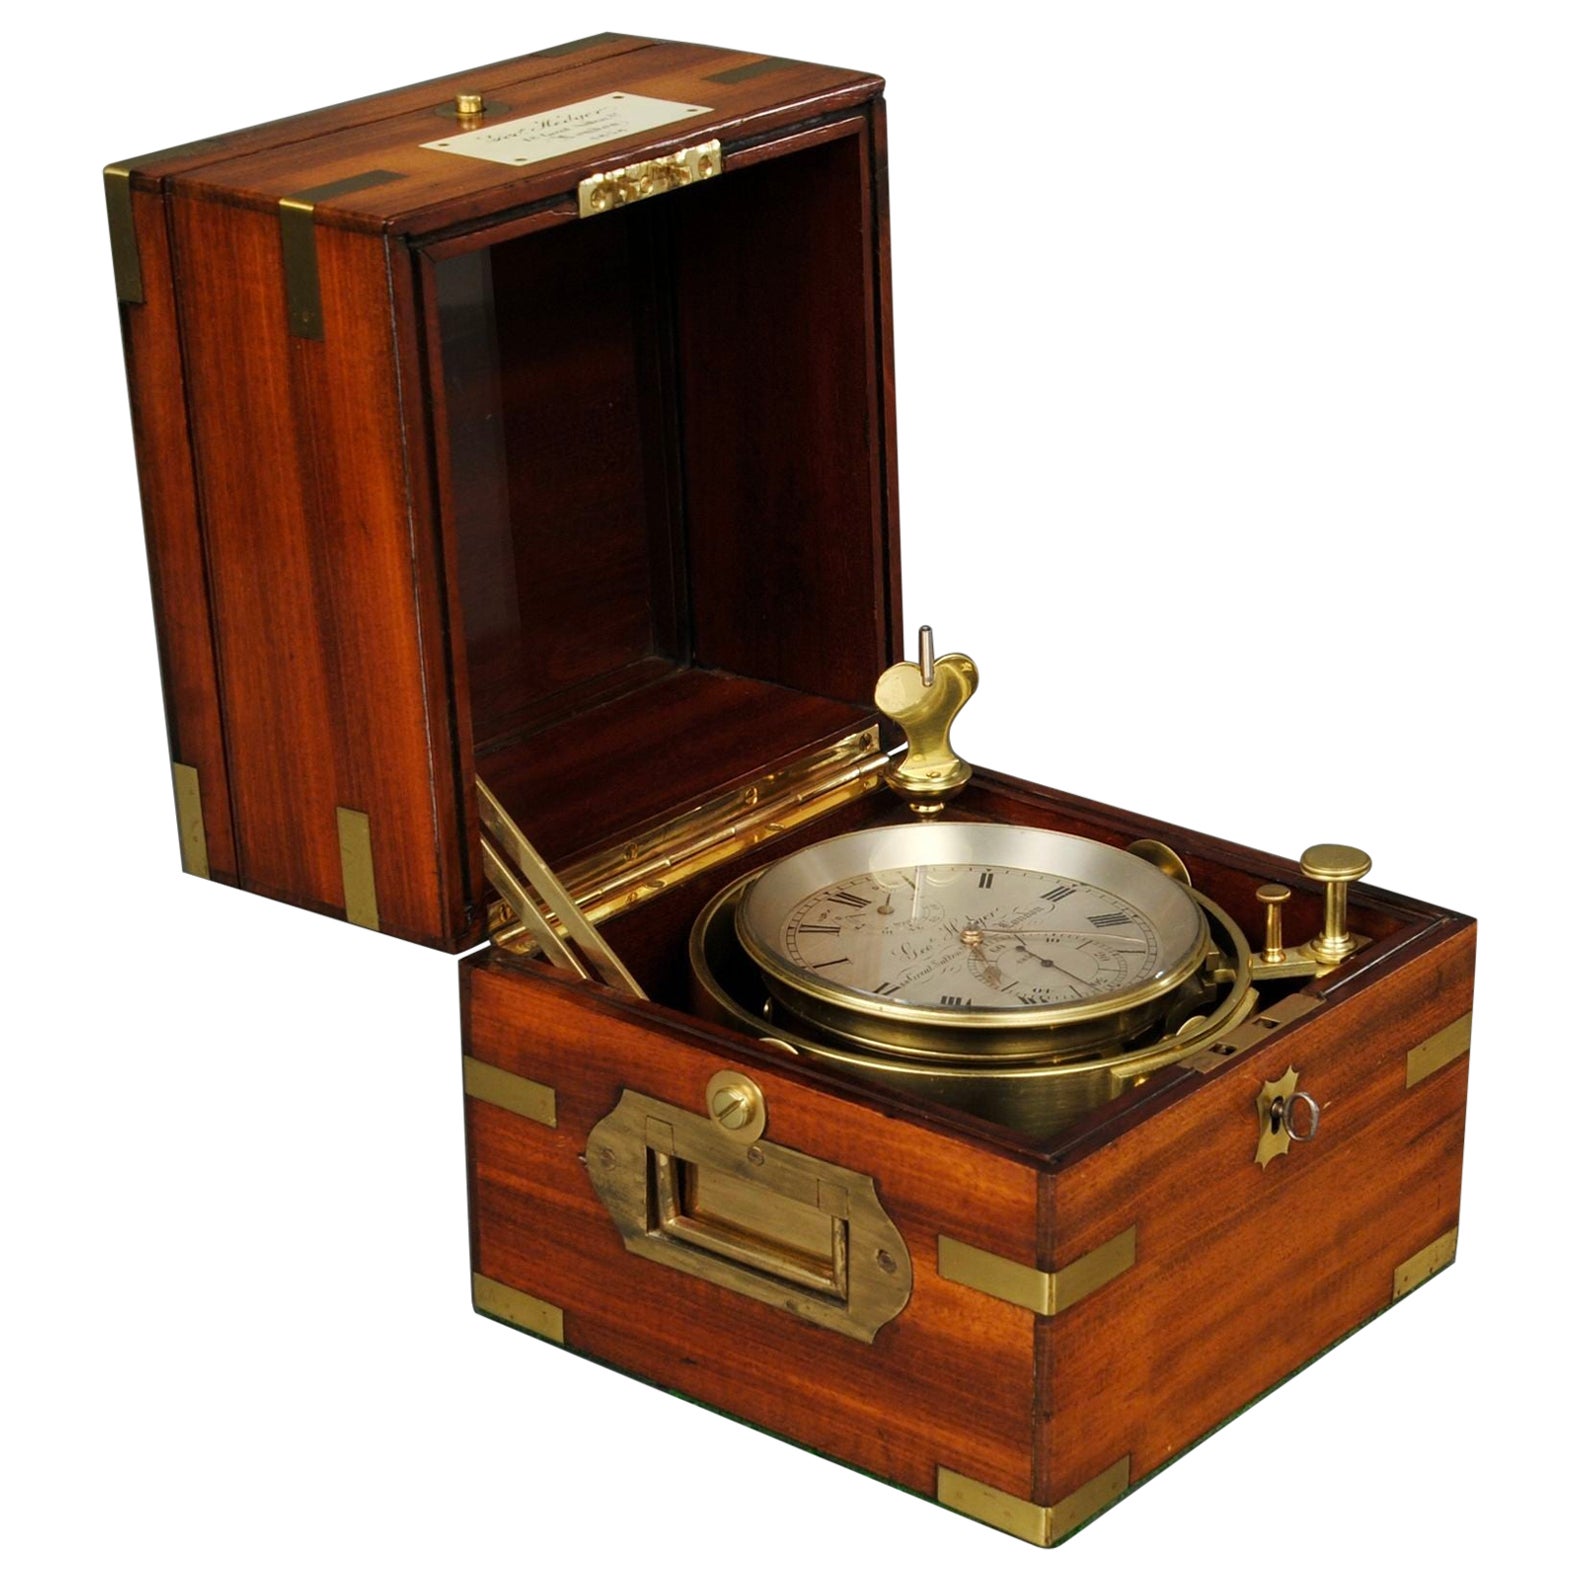 A Rare 2 Day Marine Chronometer By George Hedger